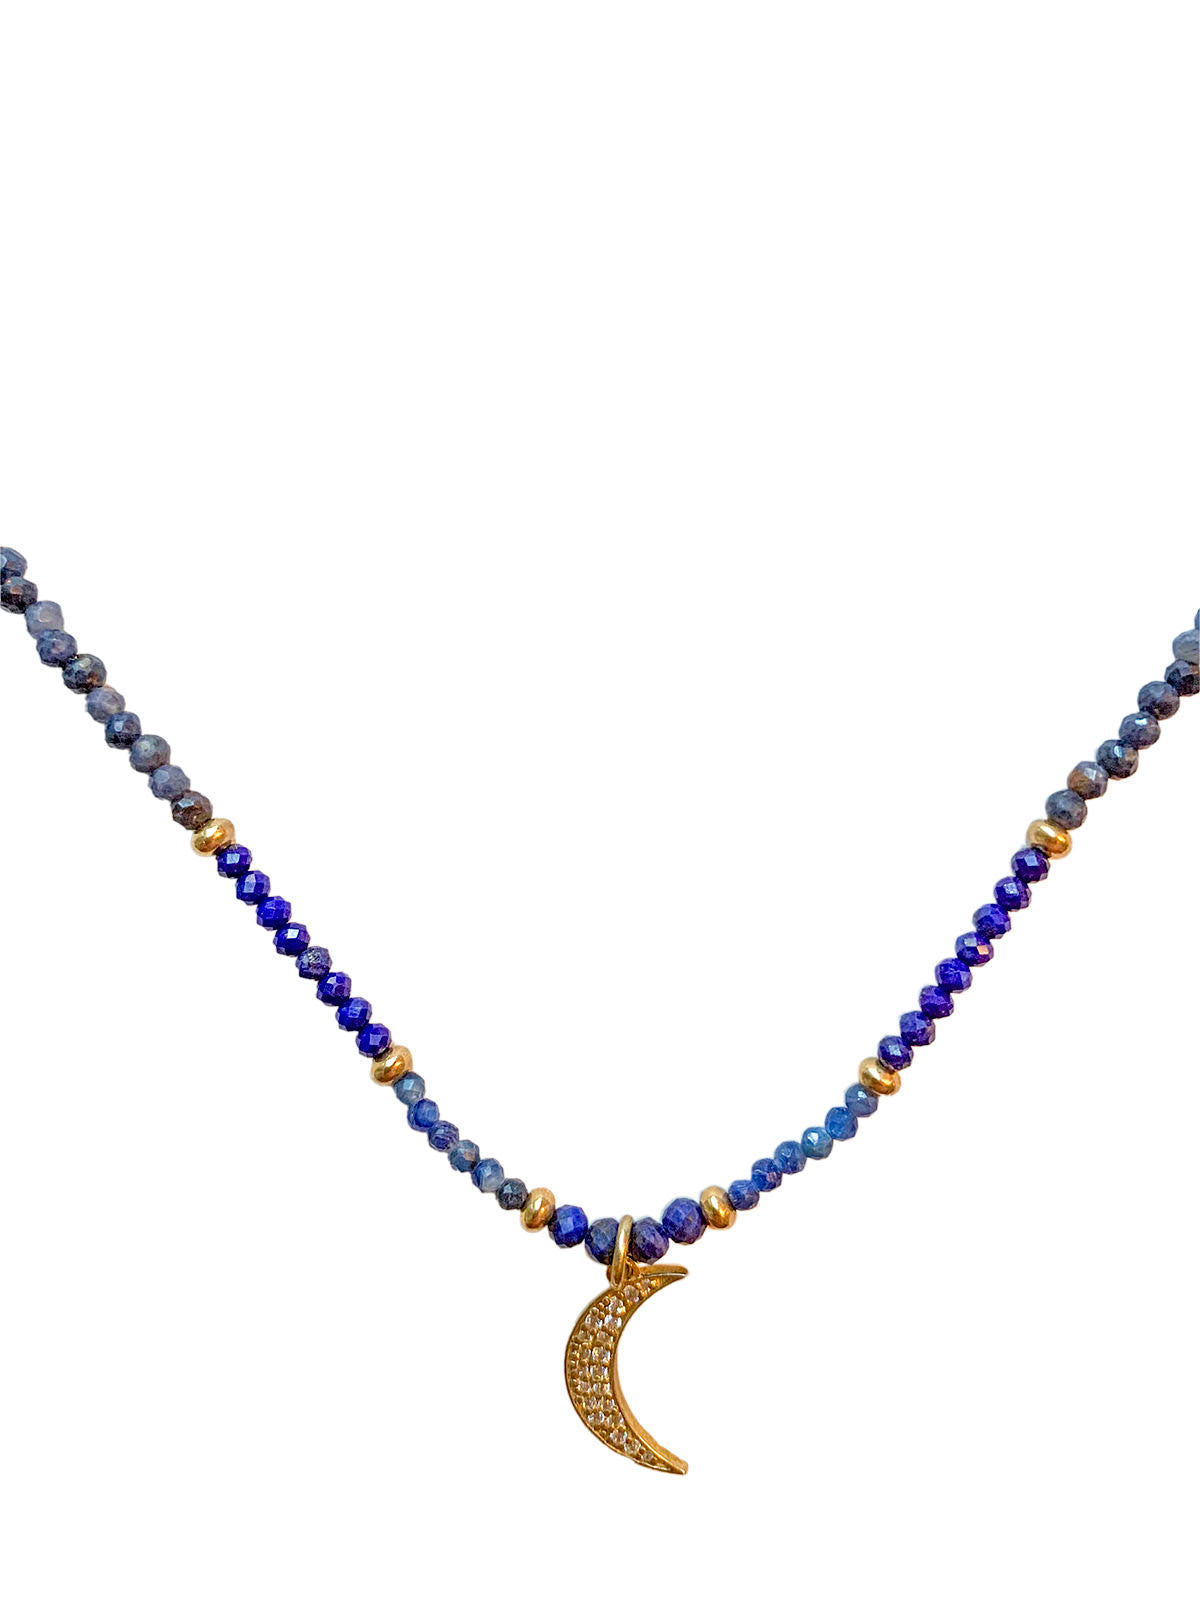 Crescent Moon in Lapis, Kyanite, and Iolite